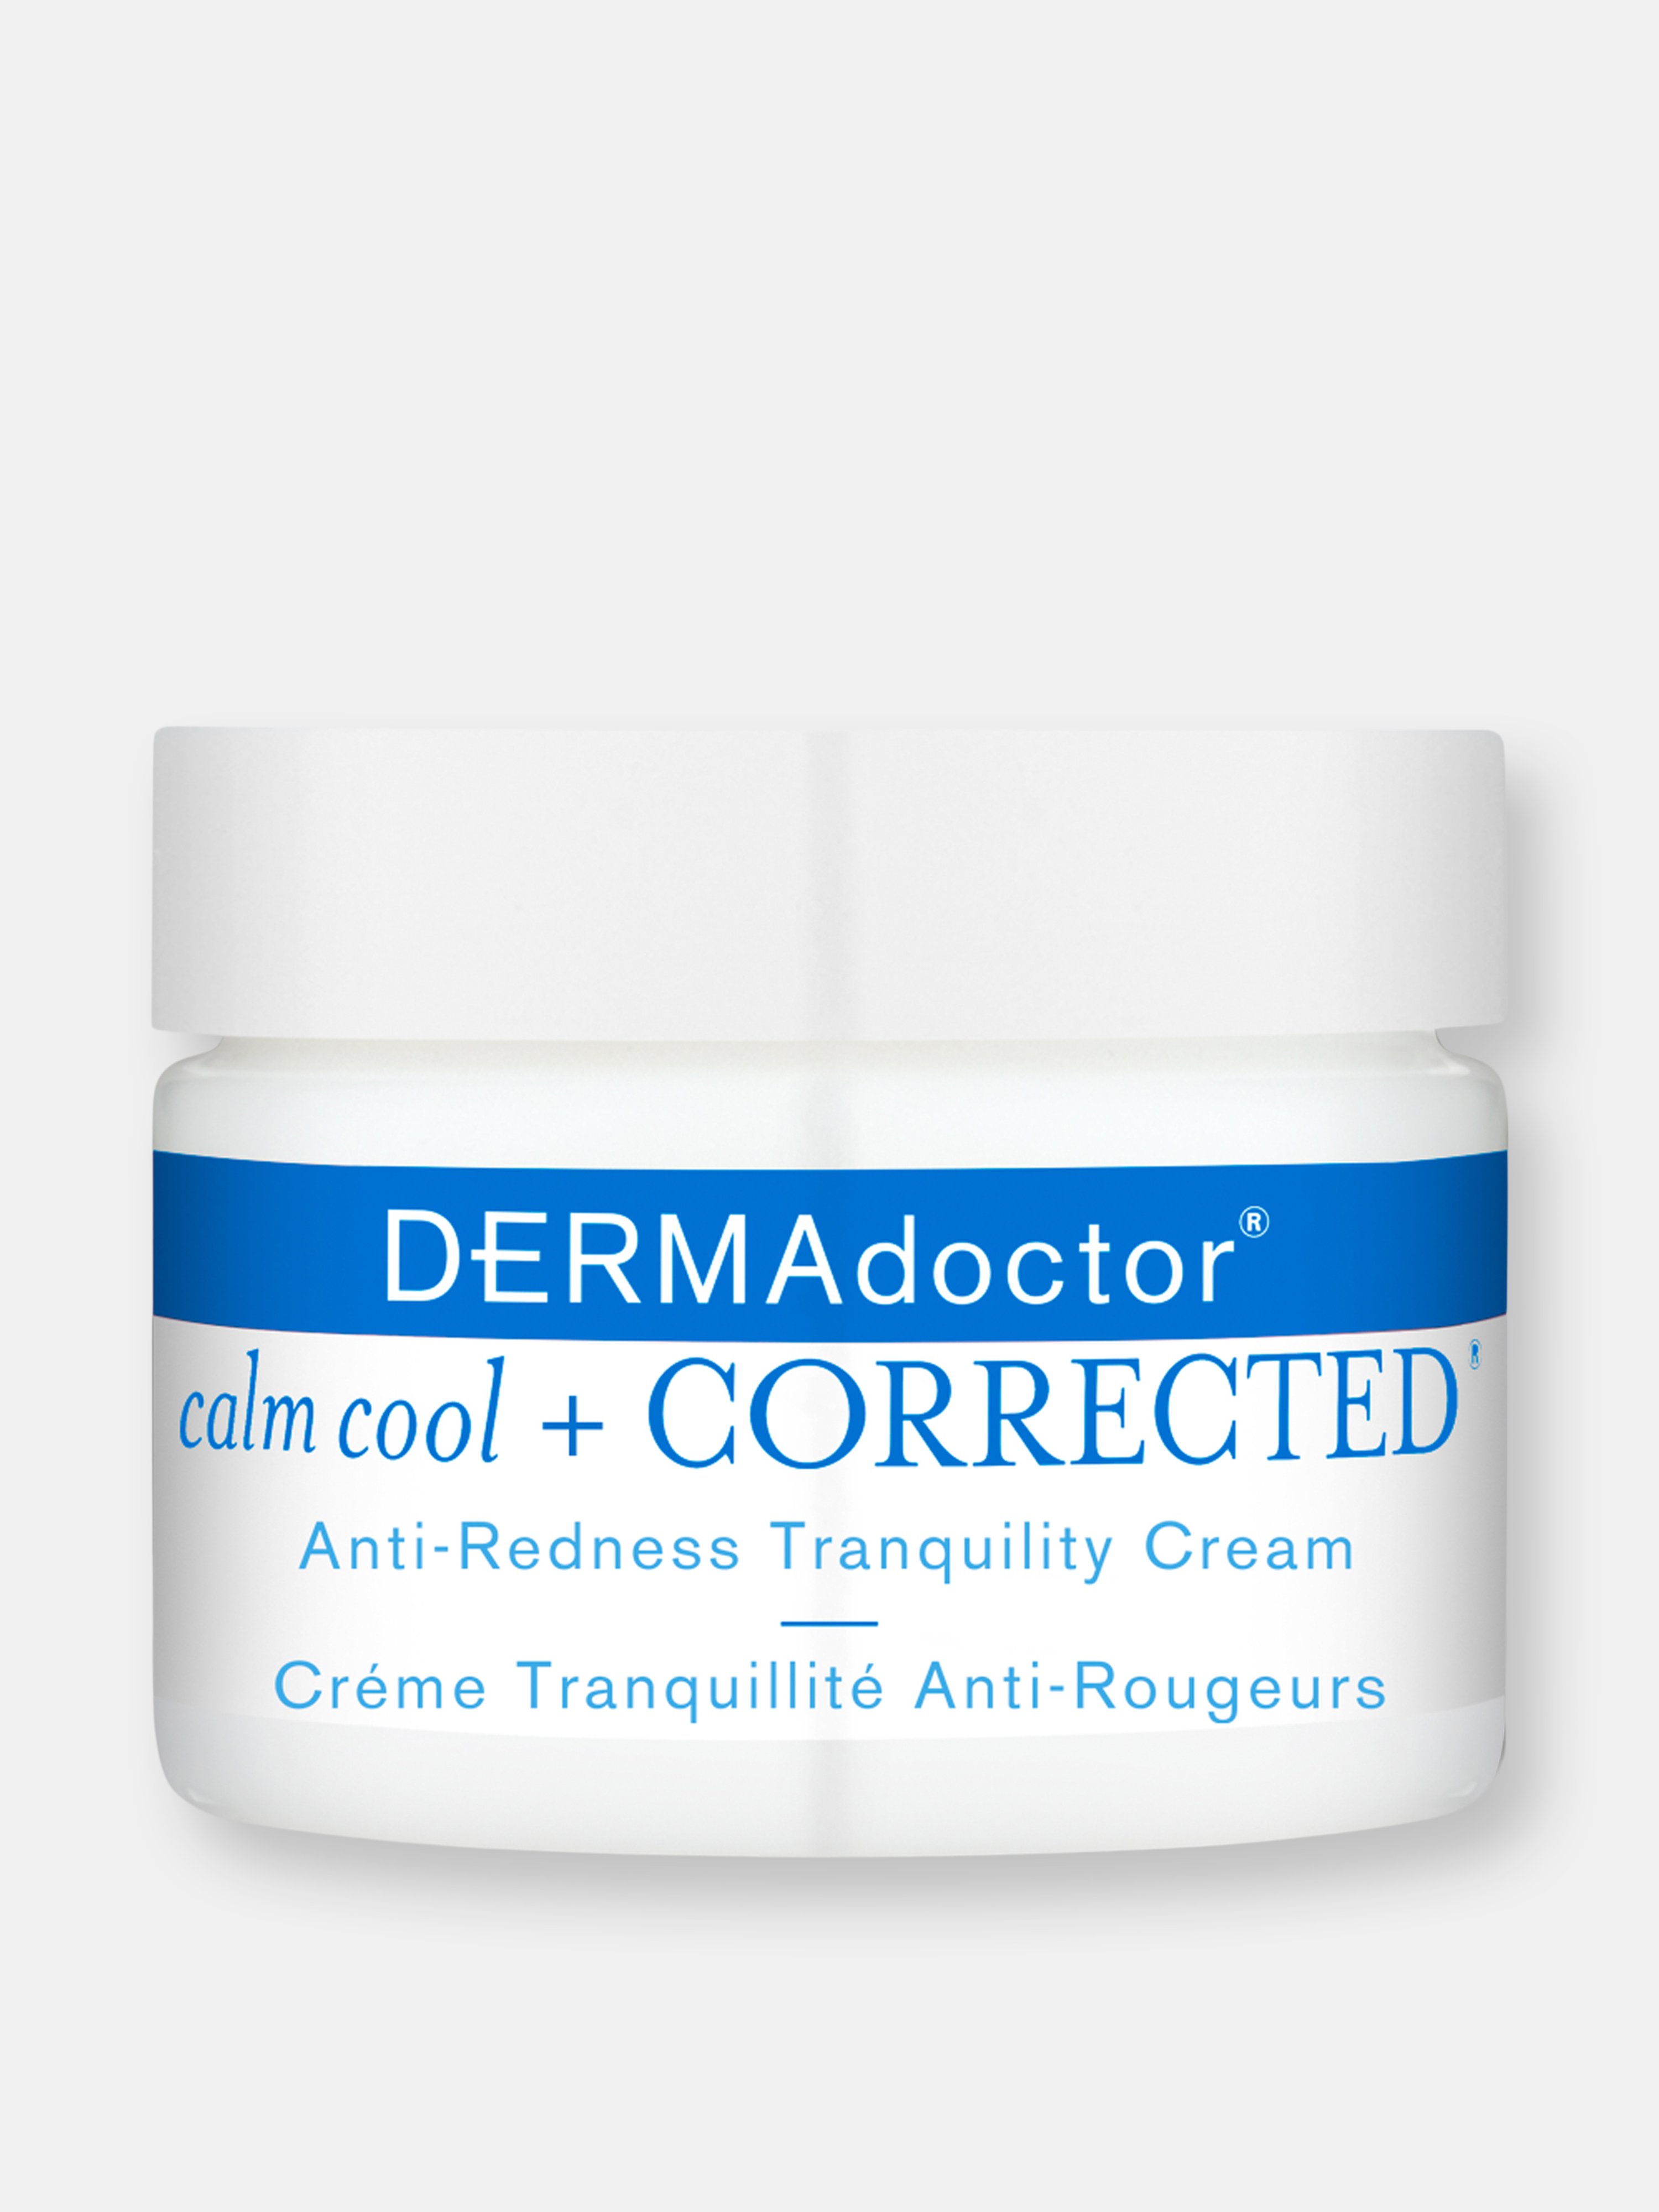 DERMADOCTOR DERMADOCTOR CALM COOL + CORRECTED ANTI-REDNESS TRANQUILITY CREAM